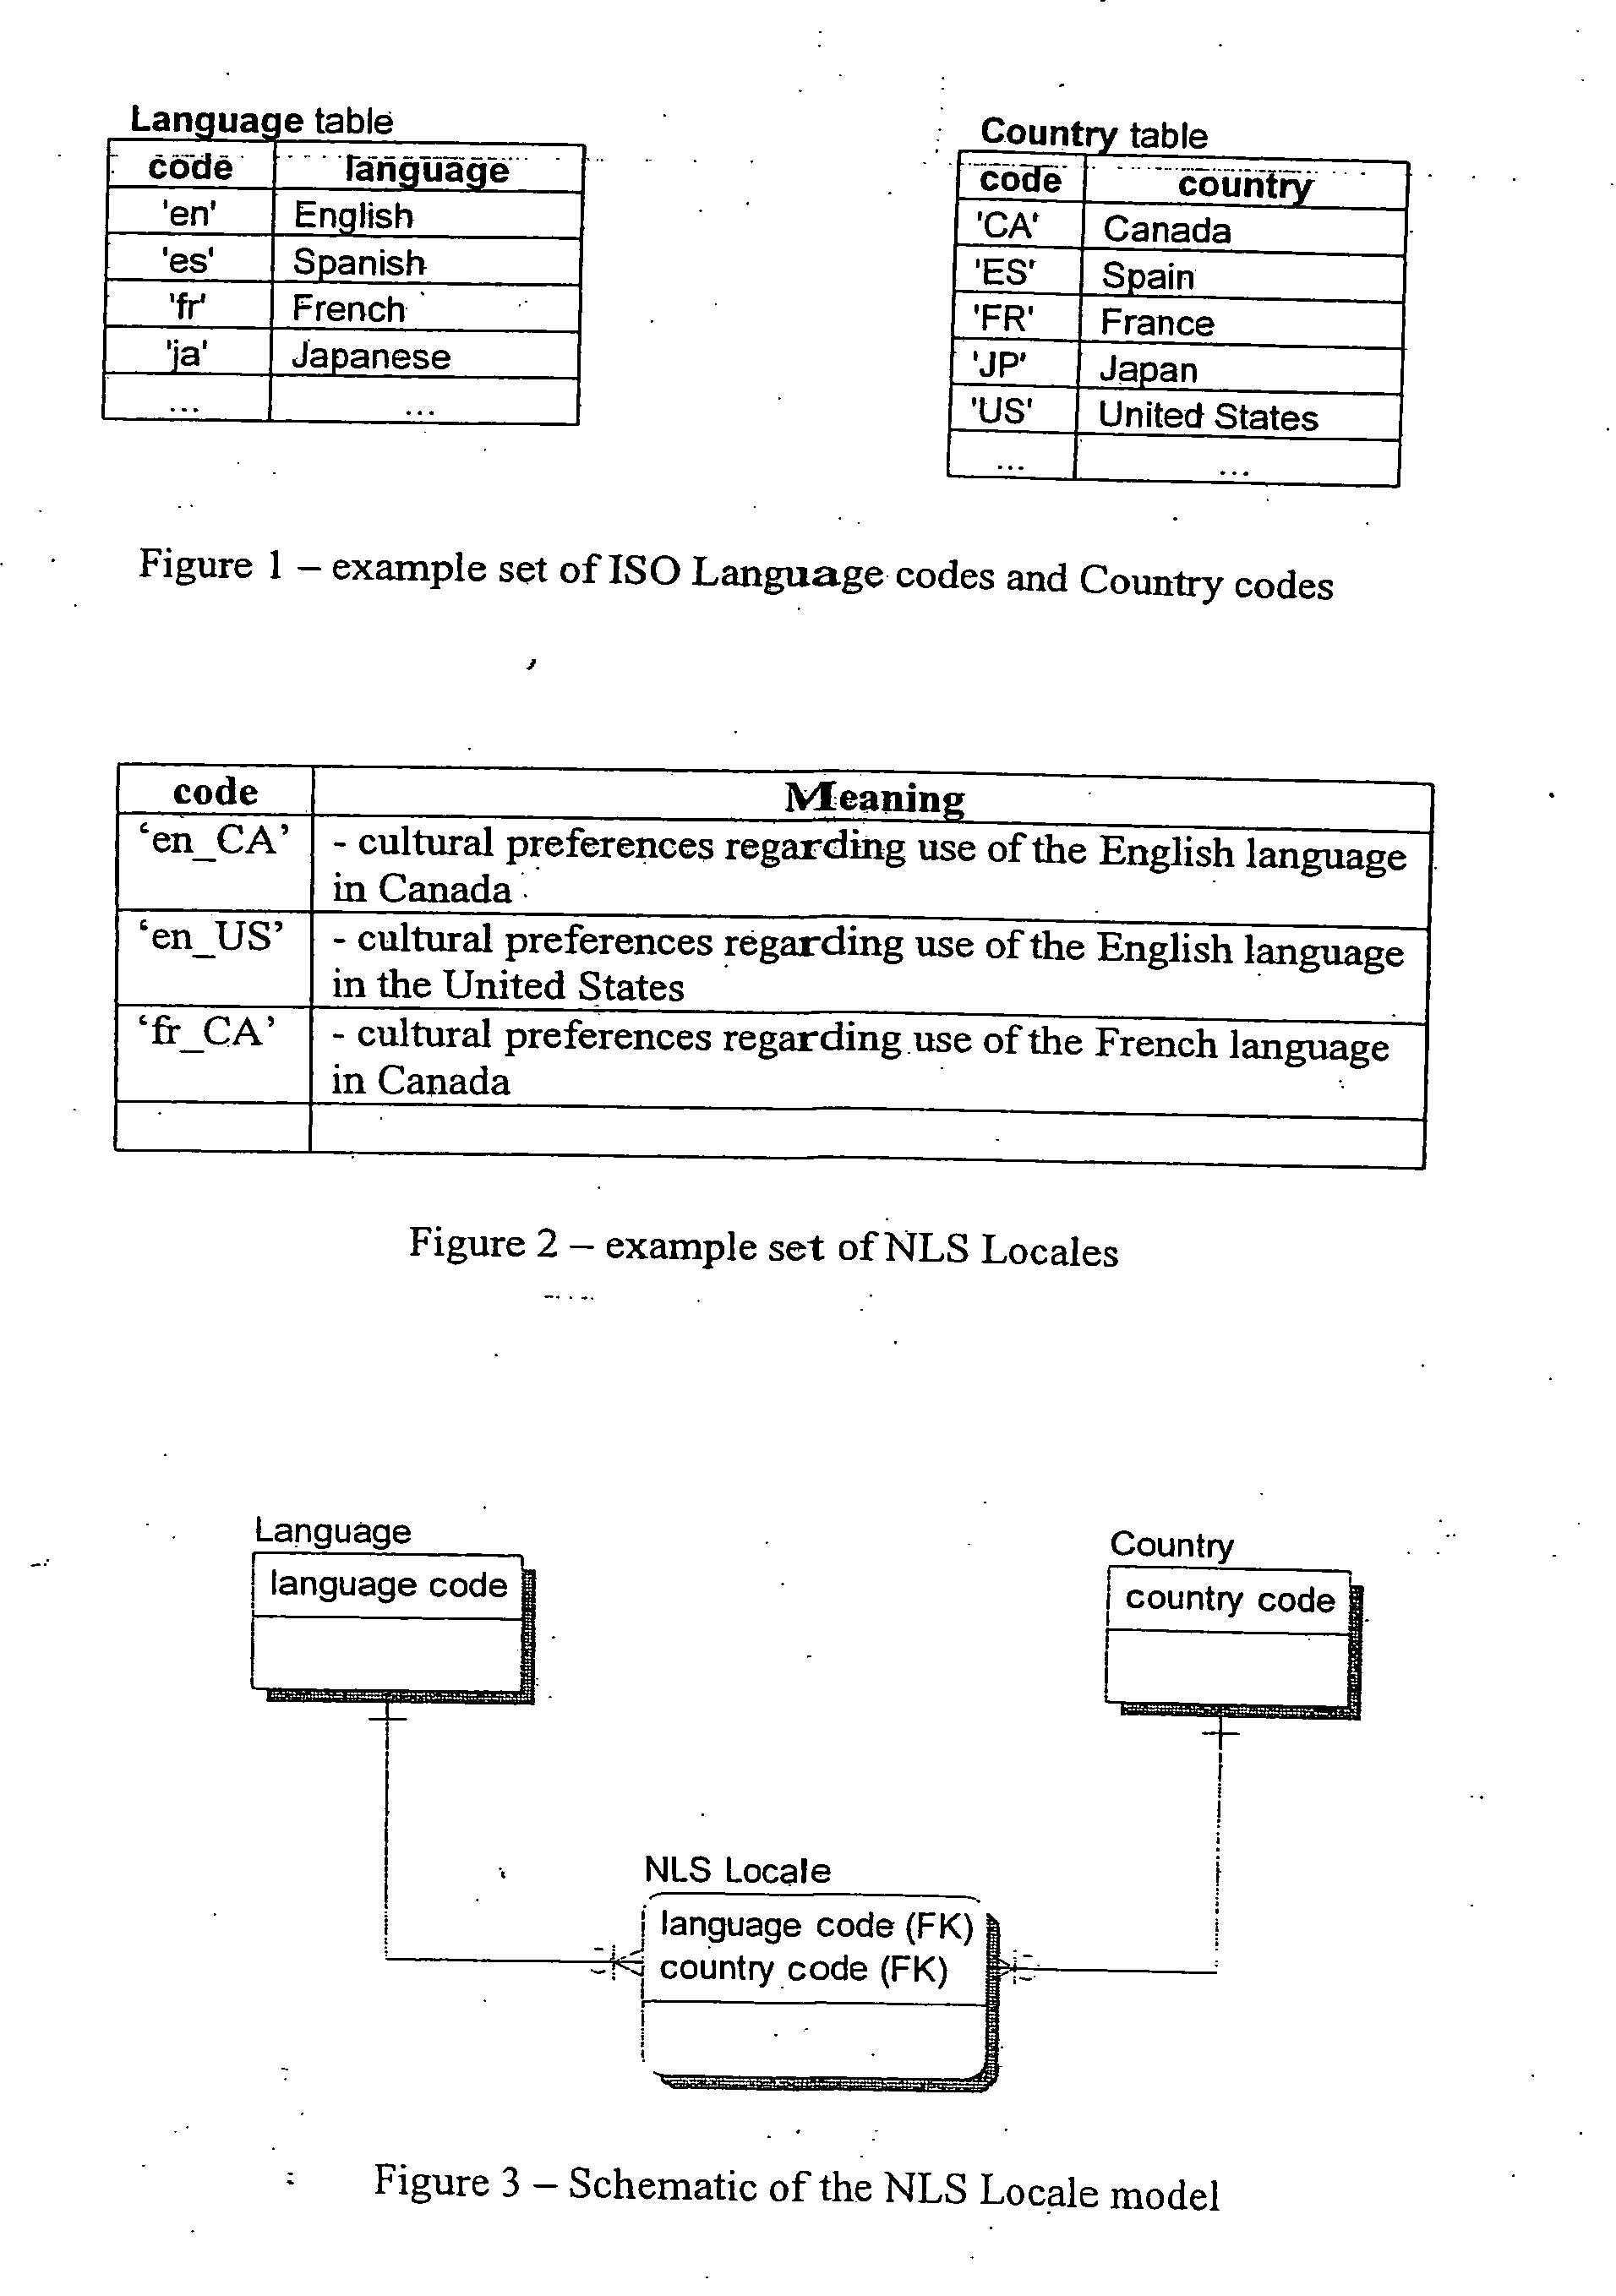 Method and structures to enable national language support for dynamic data